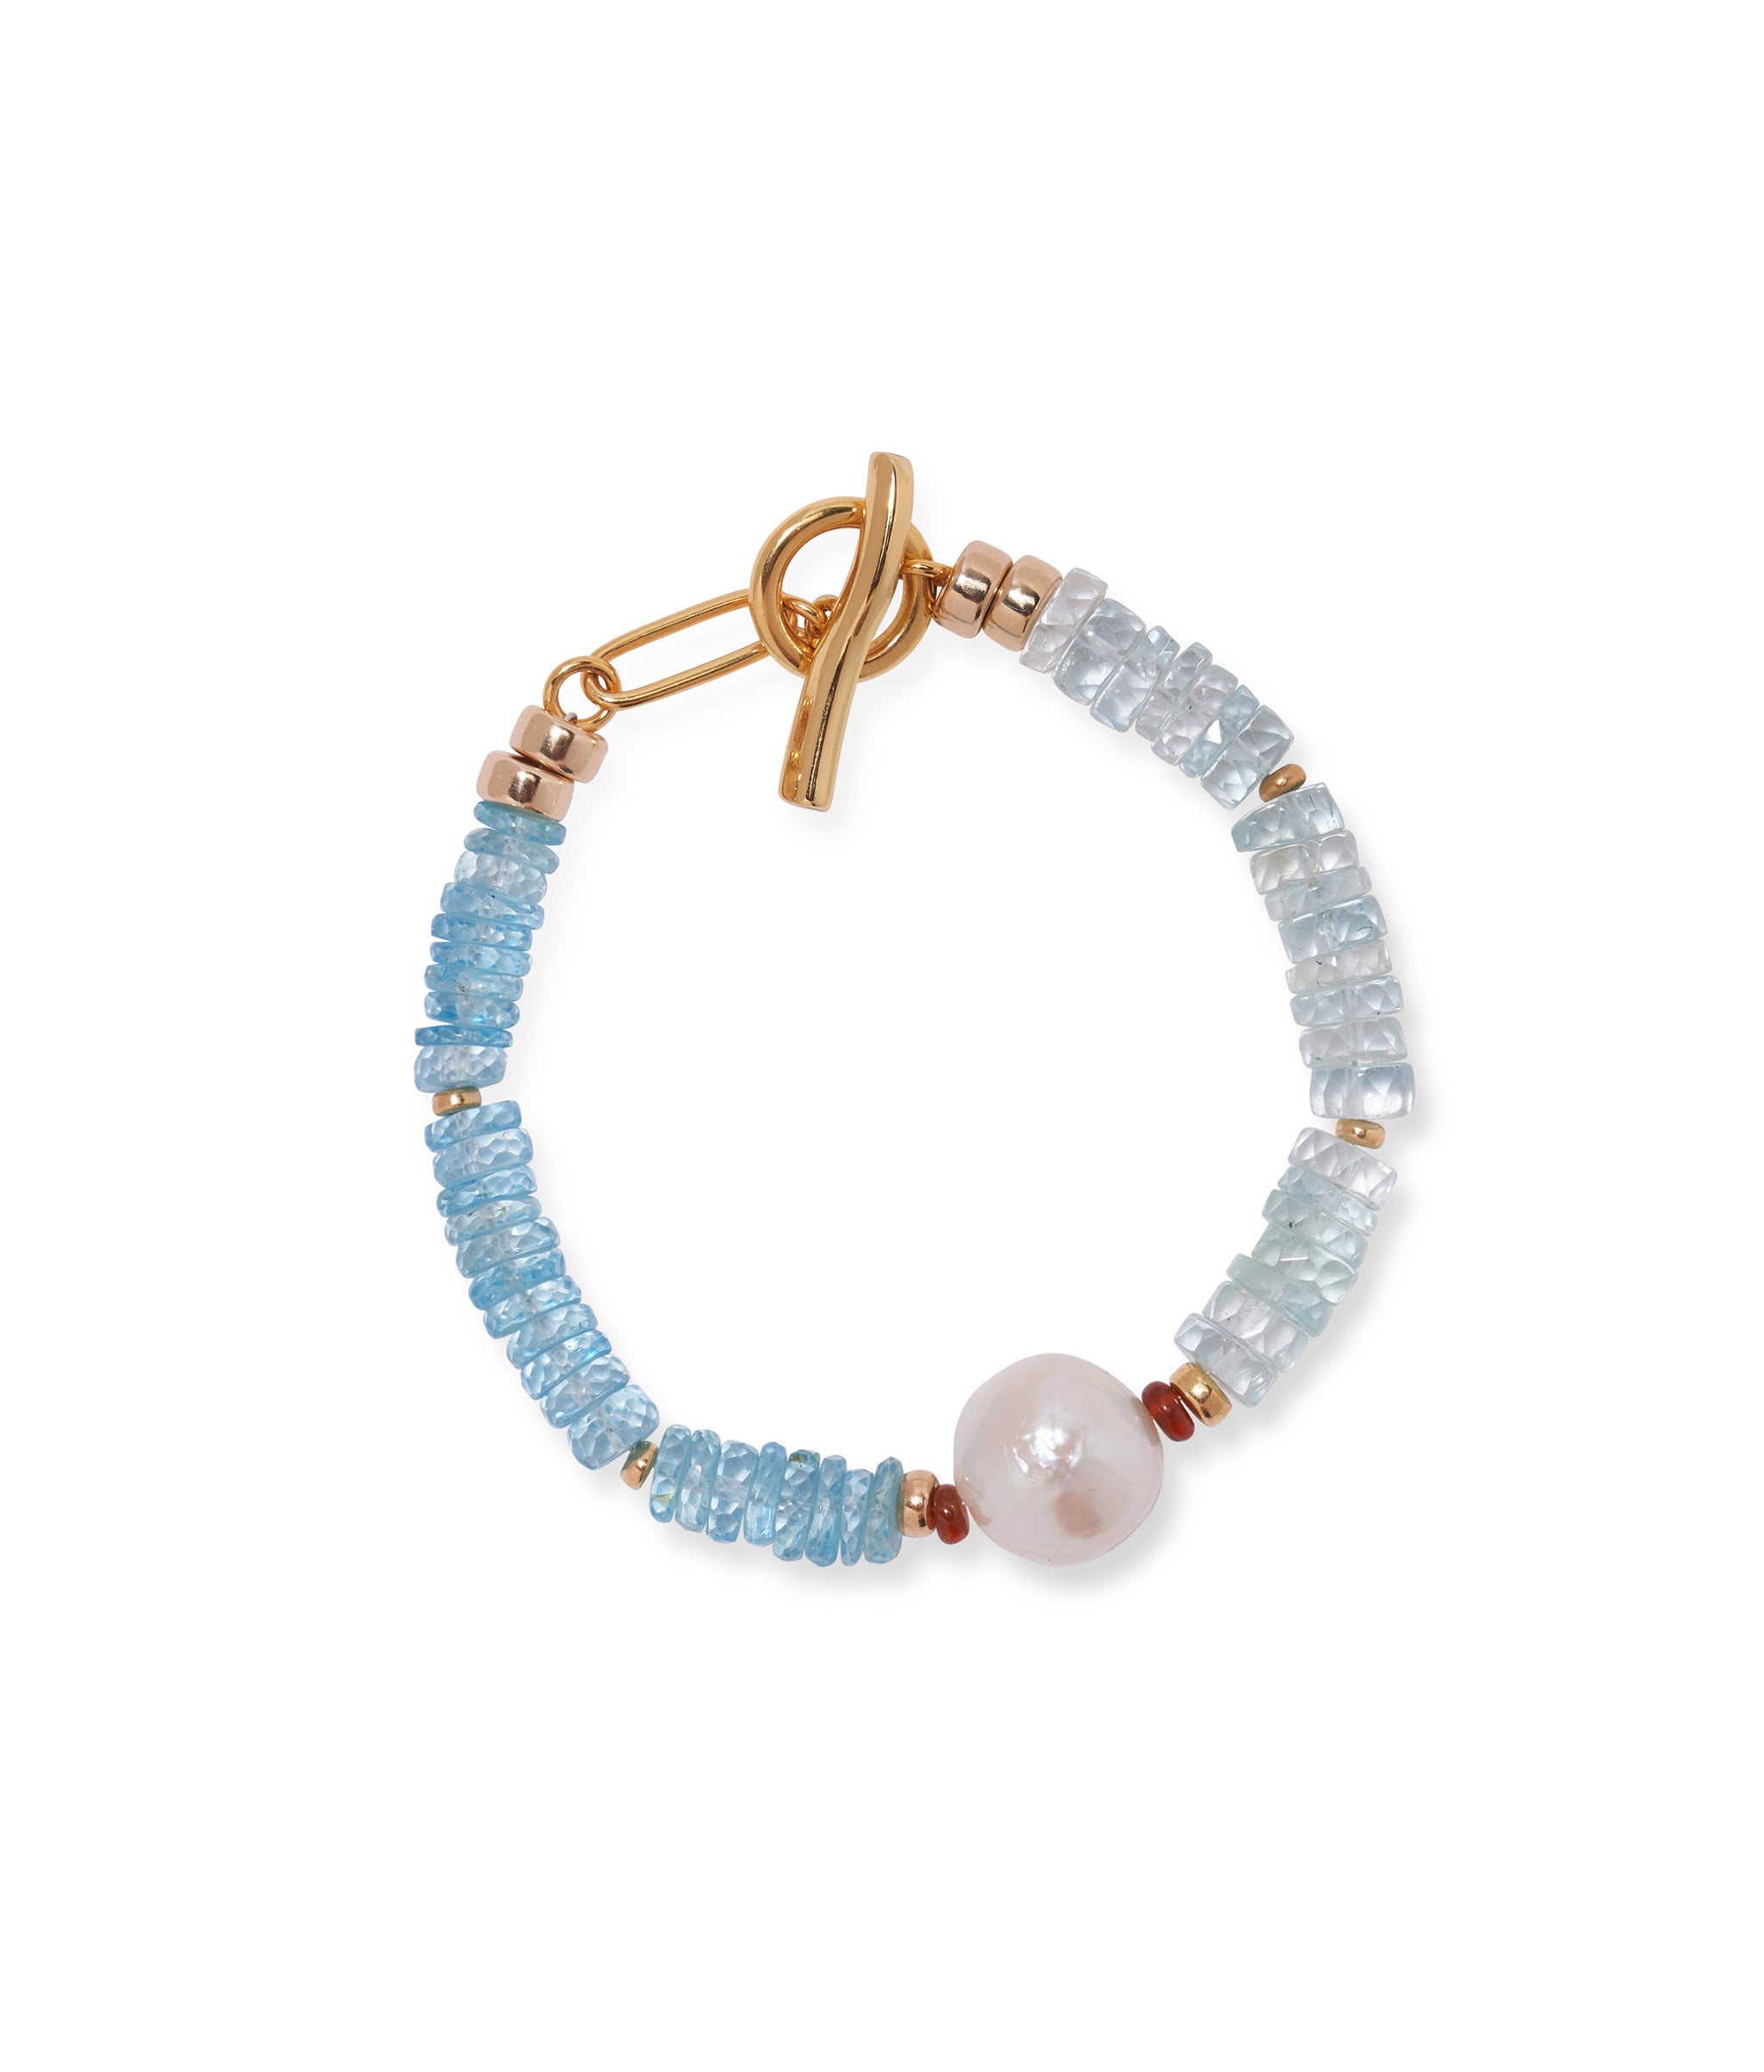 Rock Candy Bracelet in Blue Crush. Color-blocked beads in sky and deep blue topaz with pearl detail.